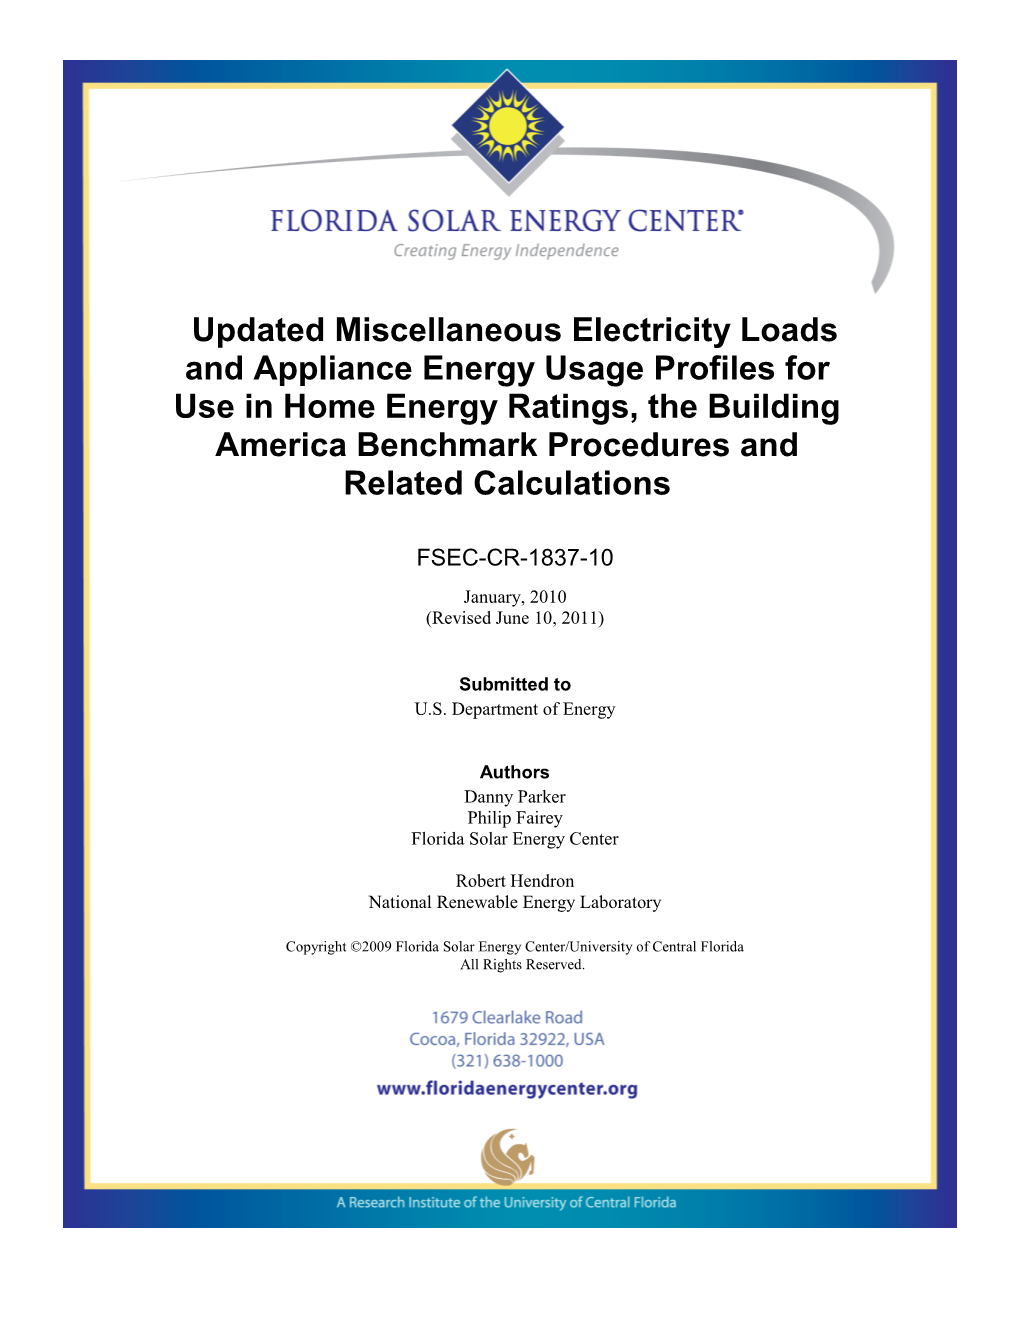 Updated Miscellaneous Electricity Loads and Appliance Energy